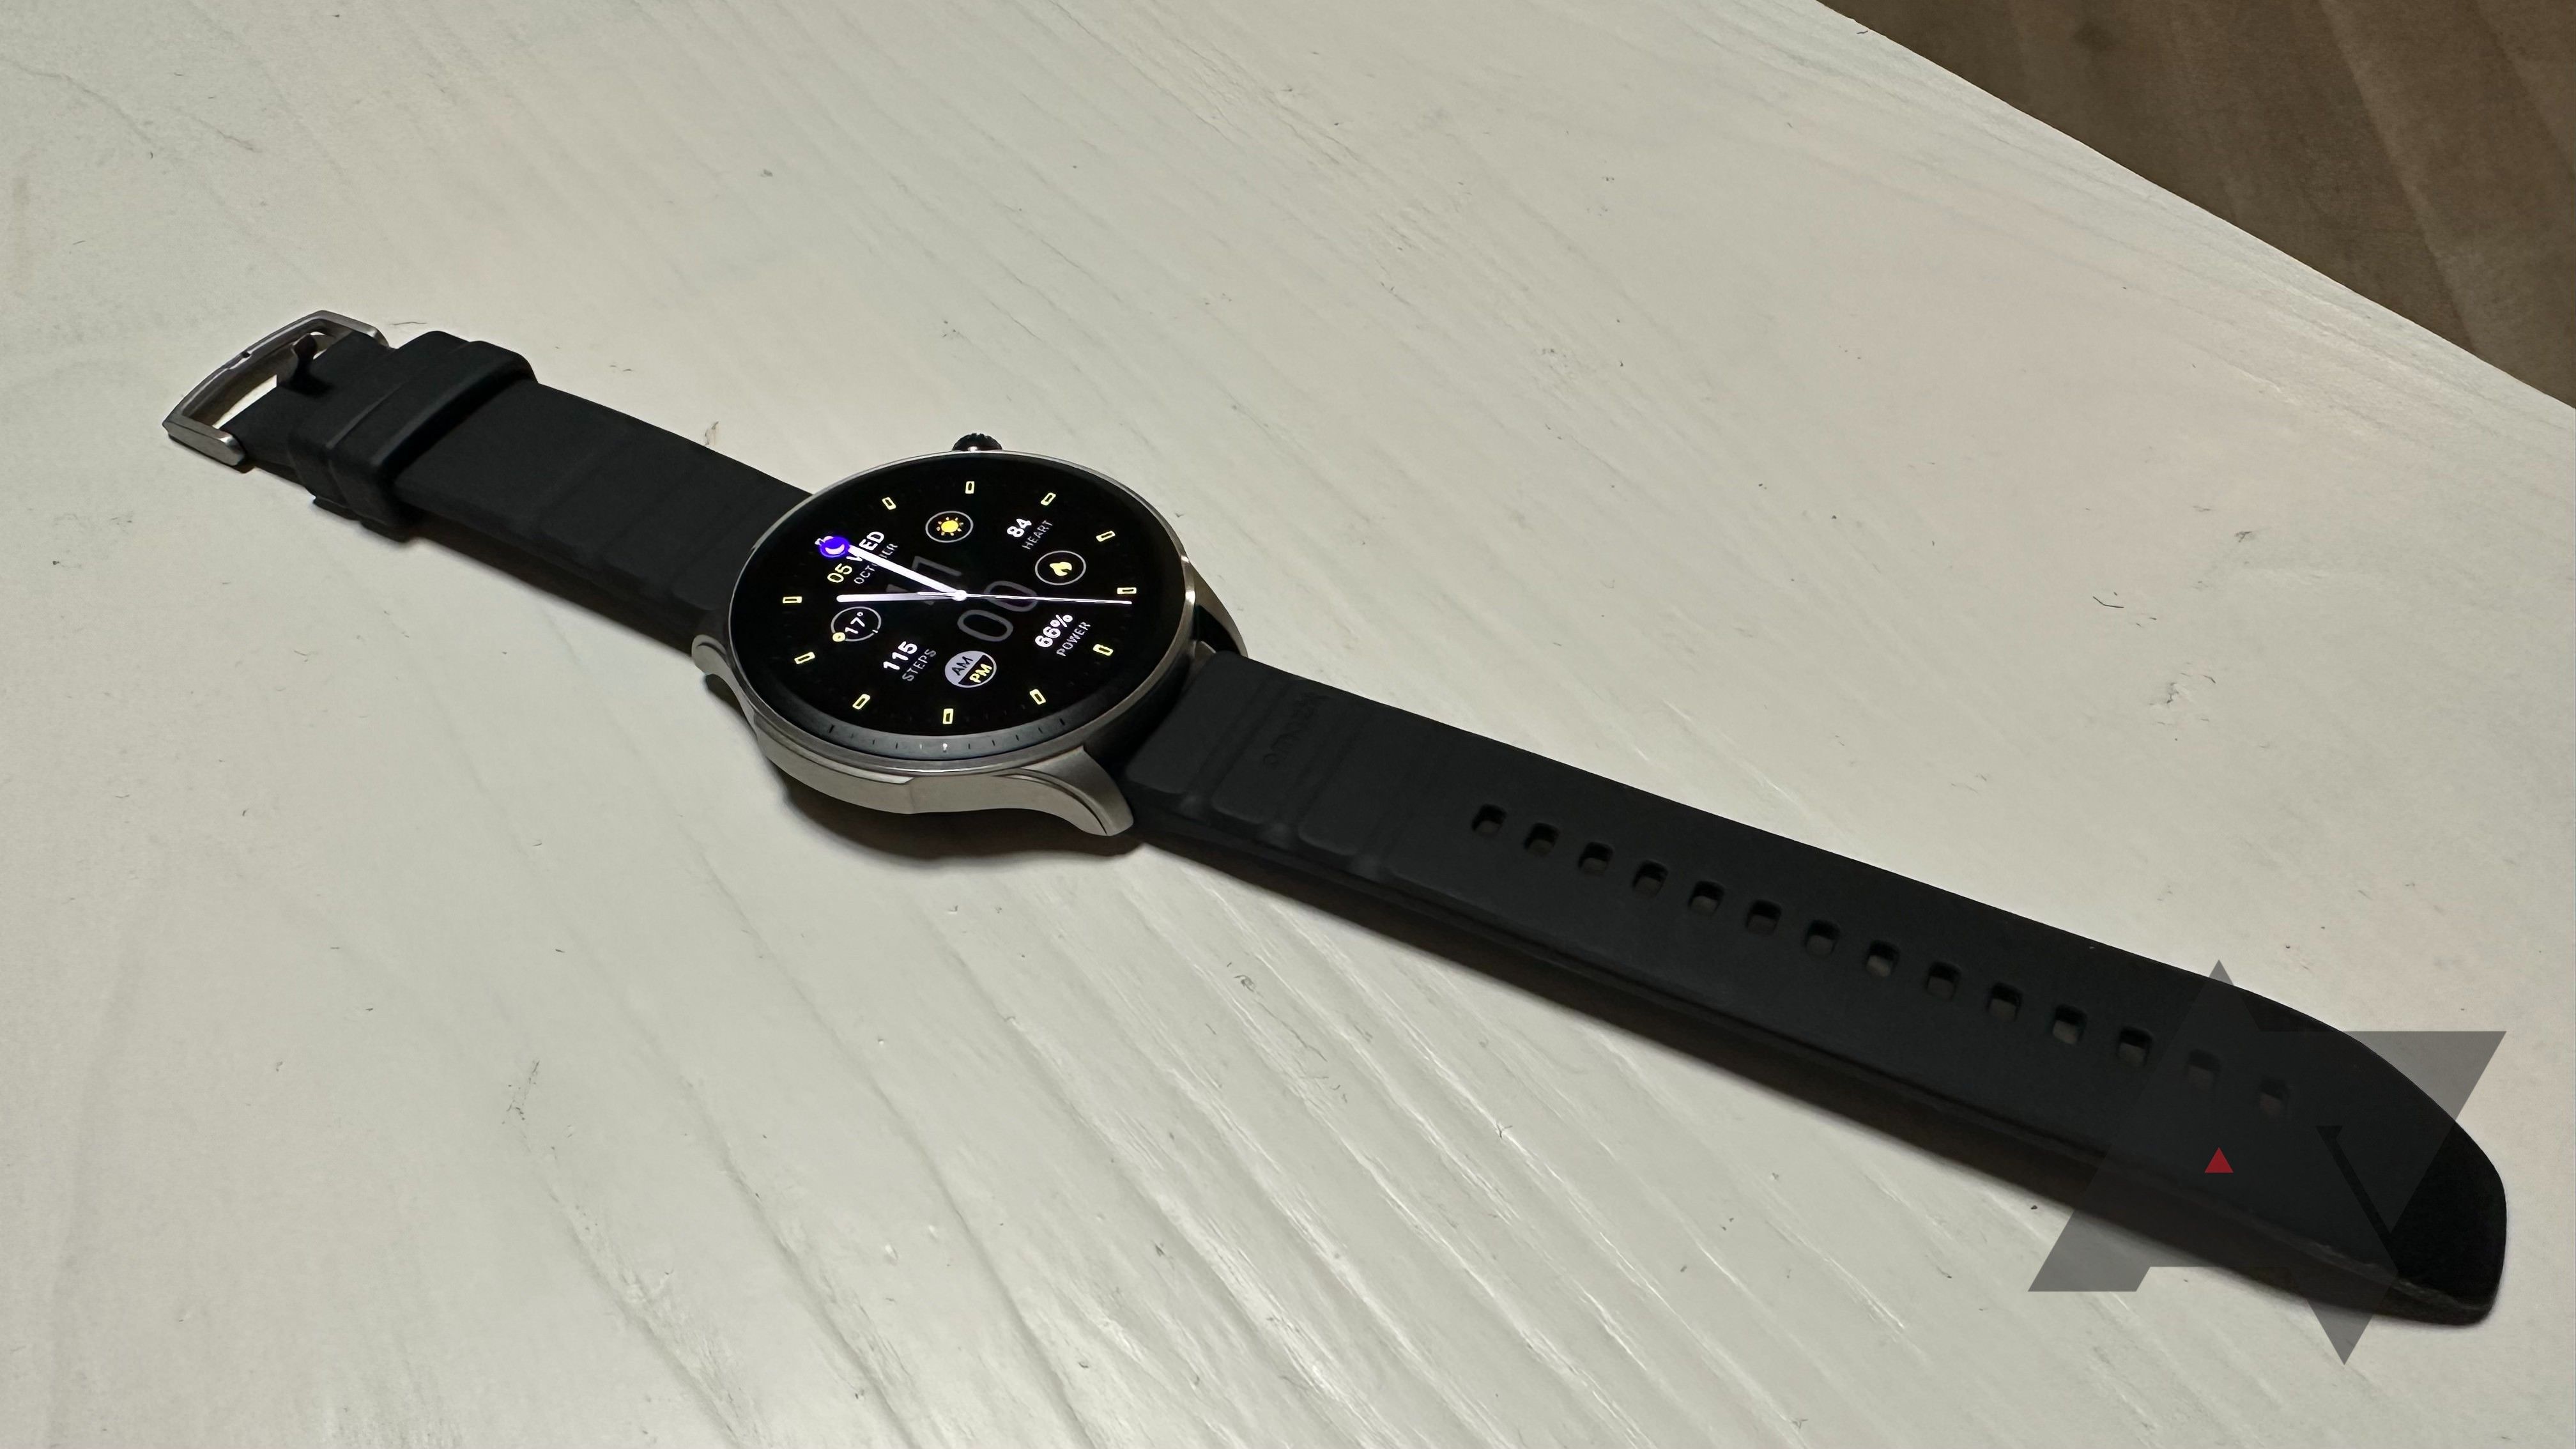 Amazfit GTR Mini review: Ginormous battery inside a petite wearable